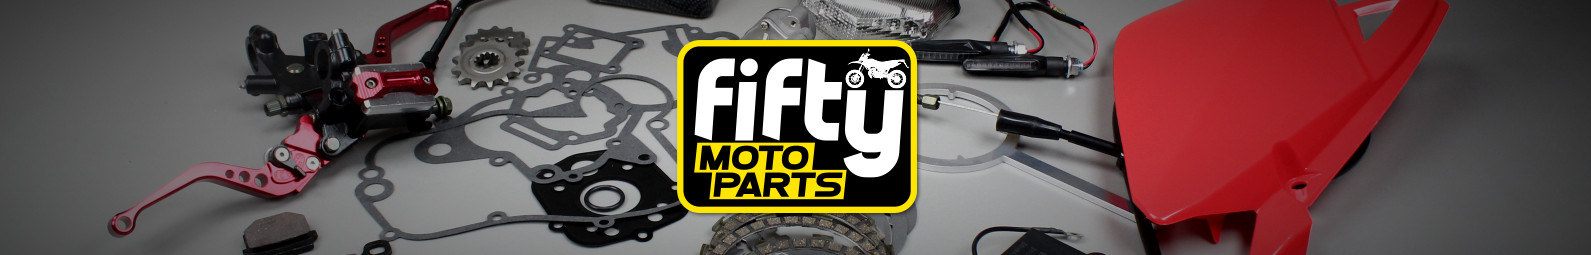 Spare parts and accessories for HONDA SH 50 FIFTY